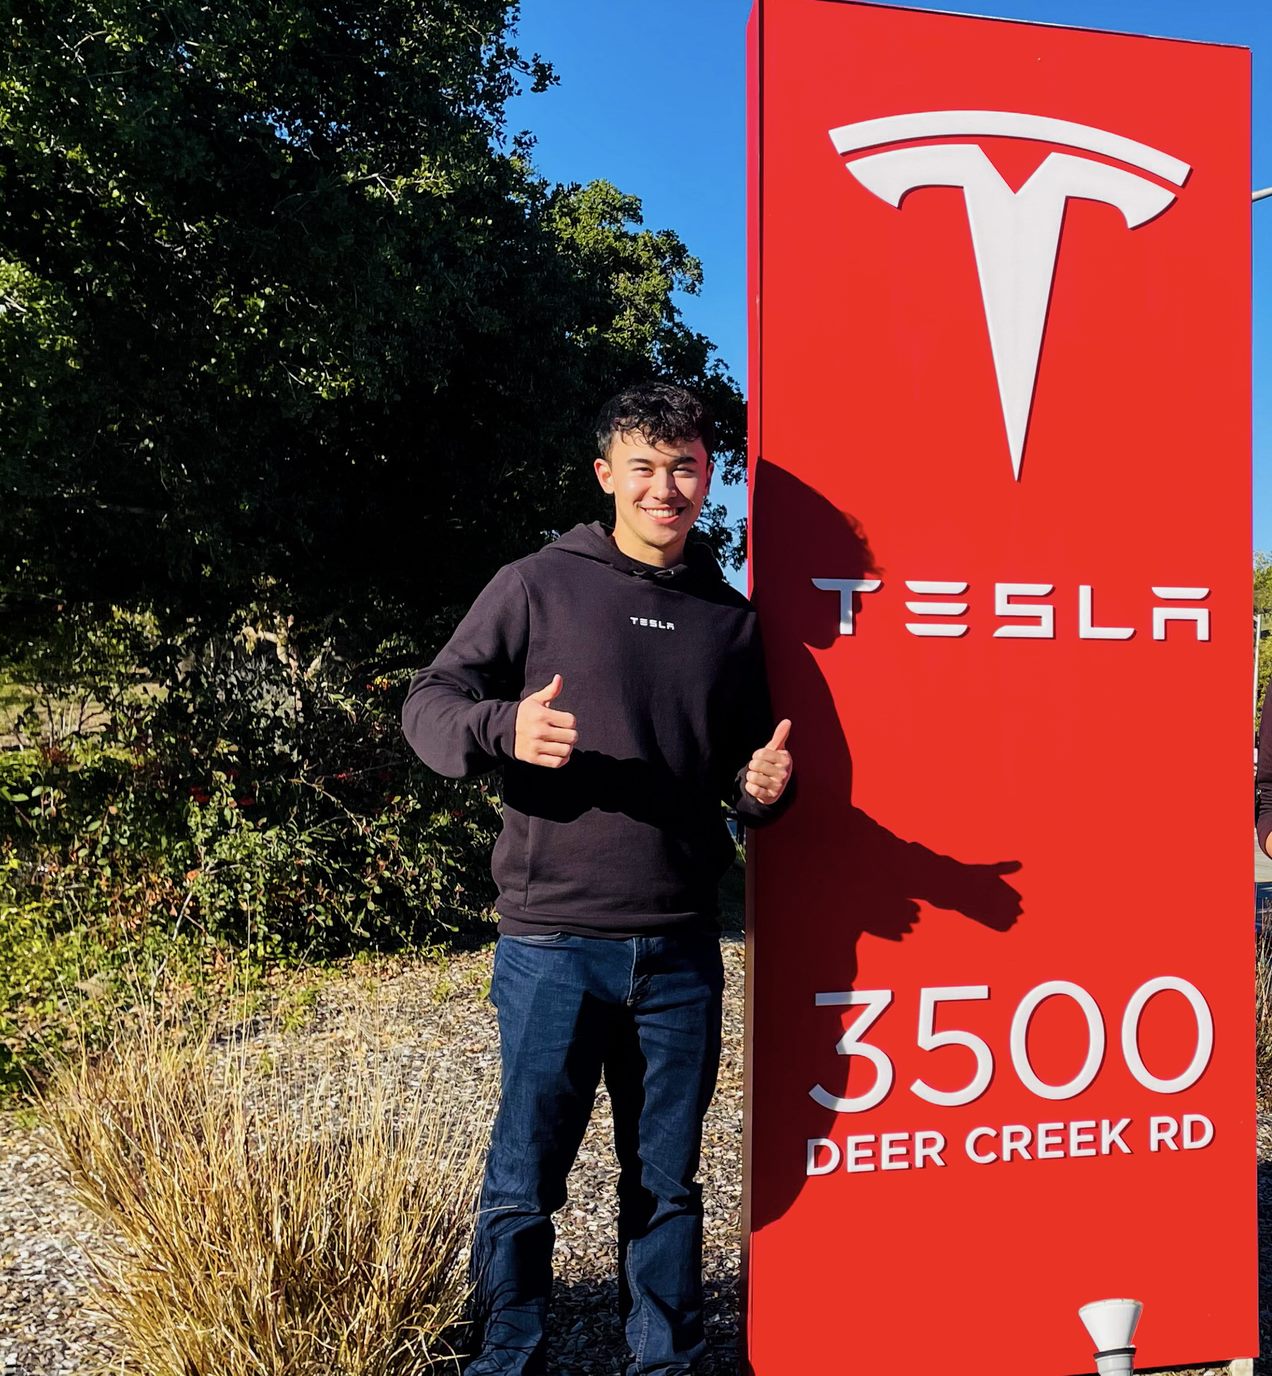 A photo of Brandon smiling and giving two thumbs up beside a Tesla sign.